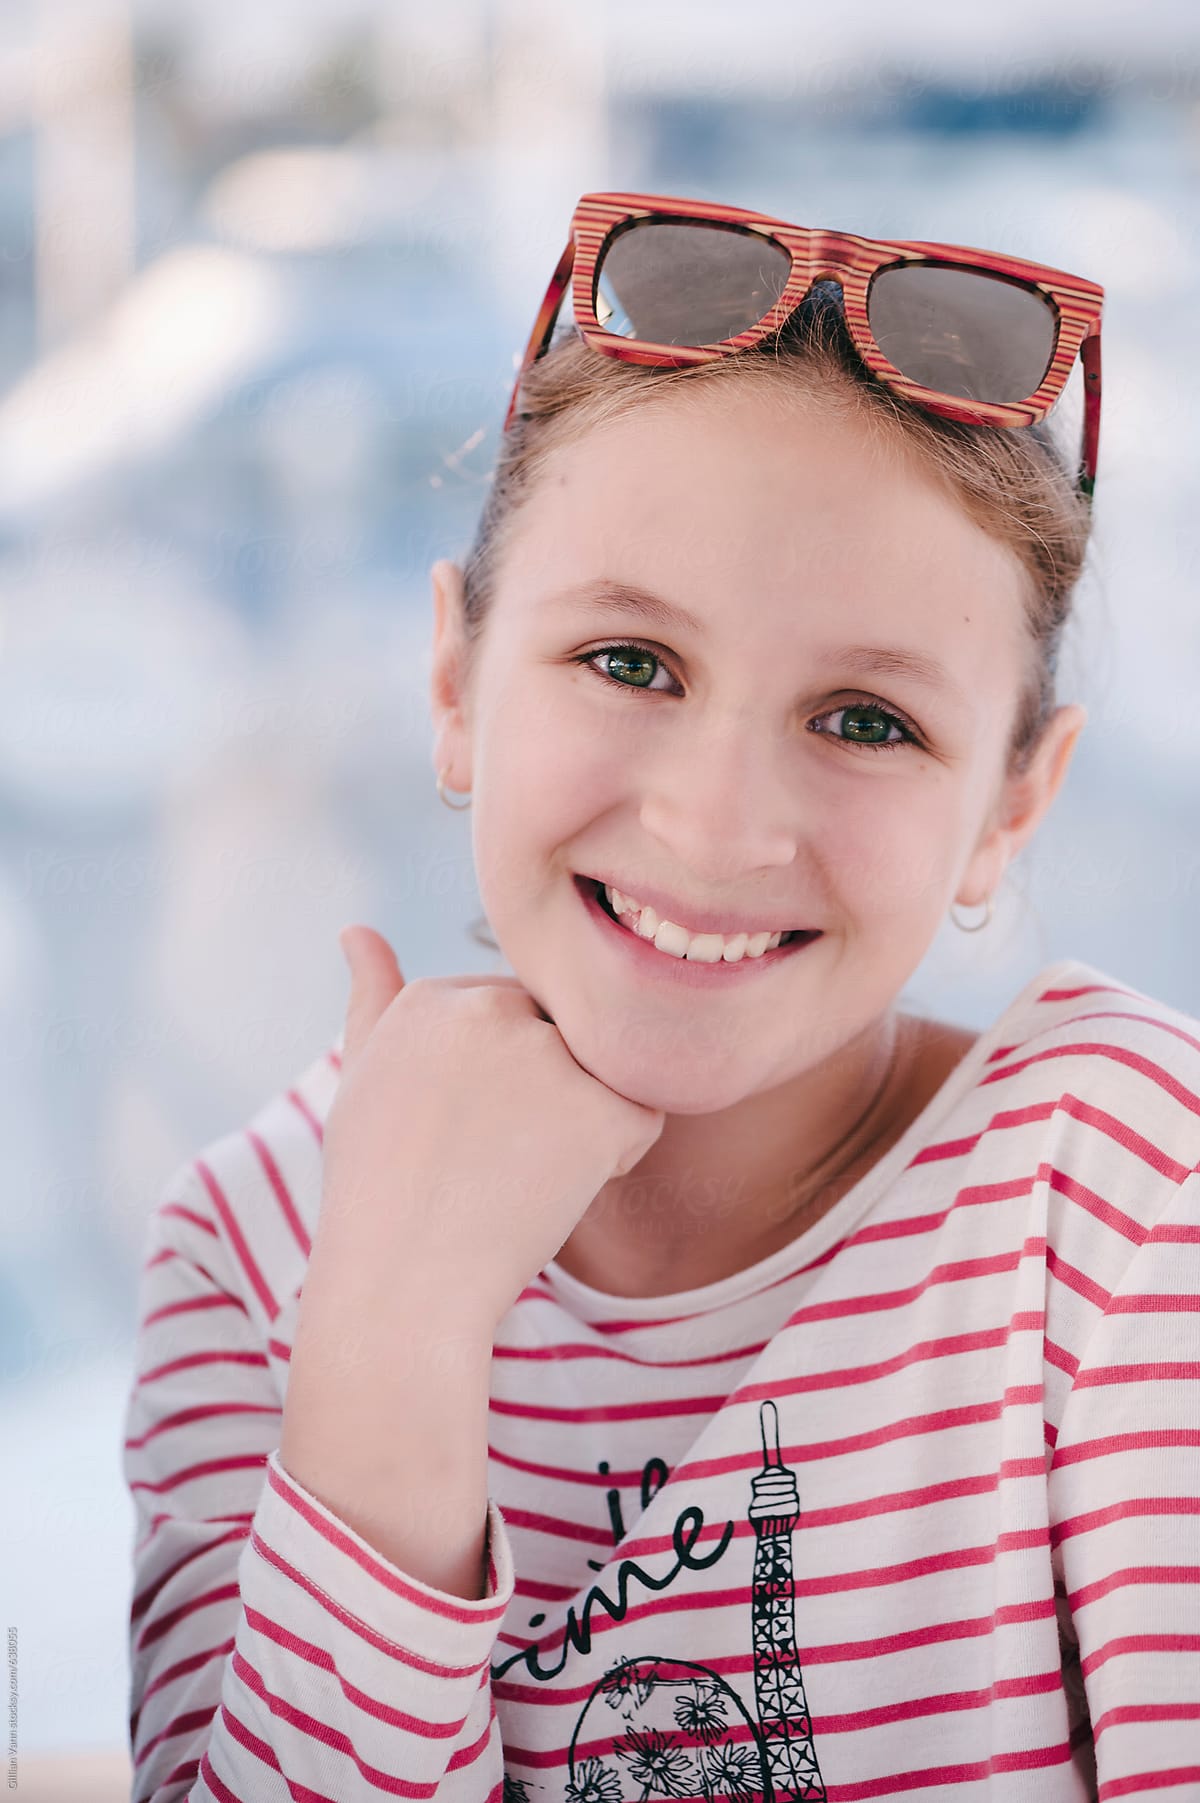 Portrait Of Tween Girl With Sunglasses And A Stripy Top By Stocksy Contributor Gillian Vann